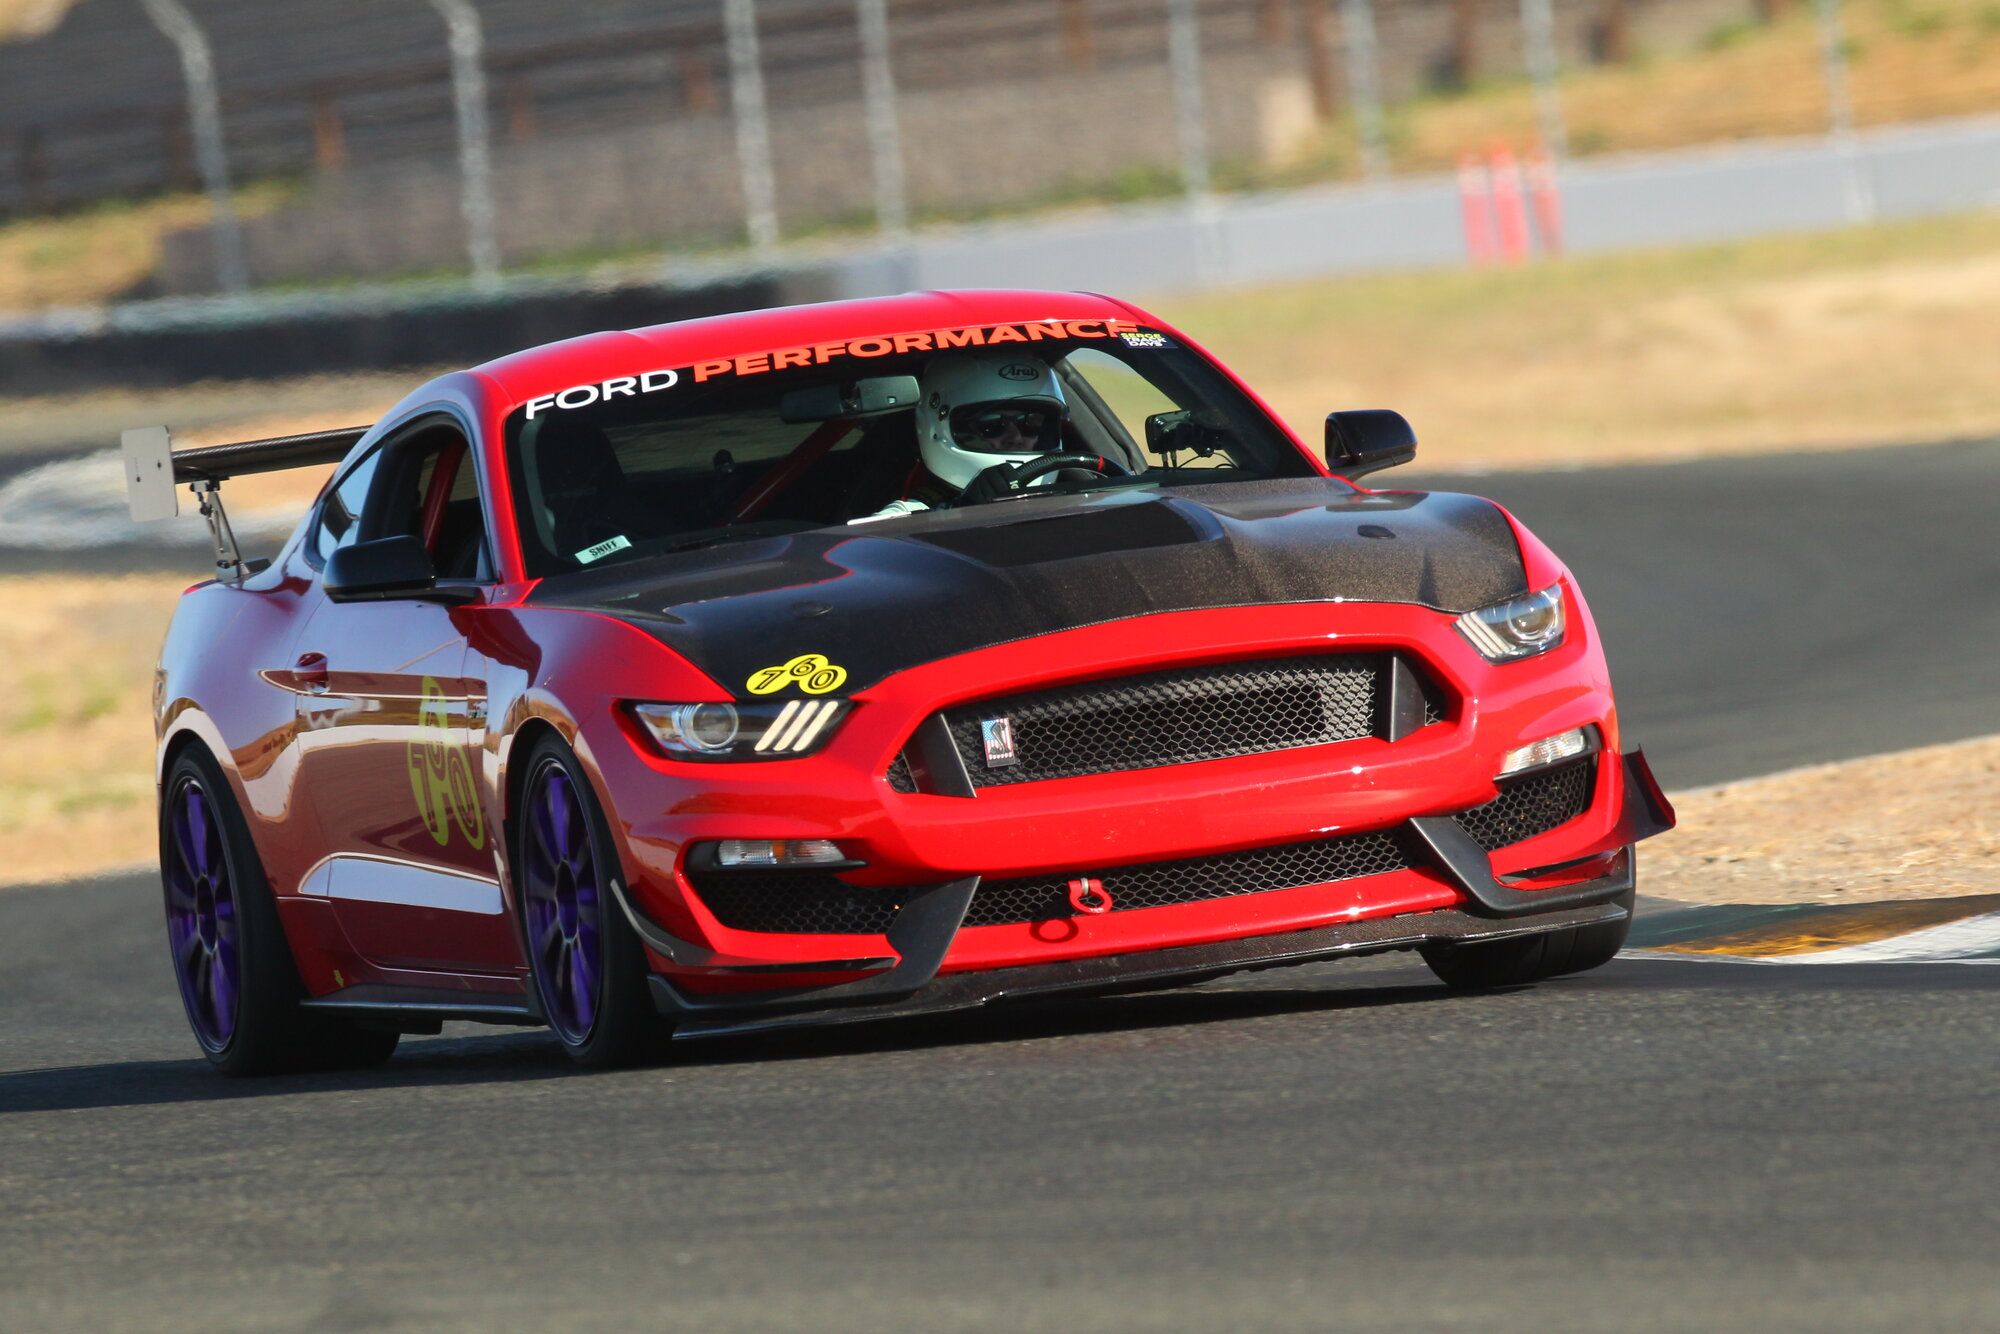 2016 Mustang
GT350 HPDE/Track -  (The Shi%^y Mustang)